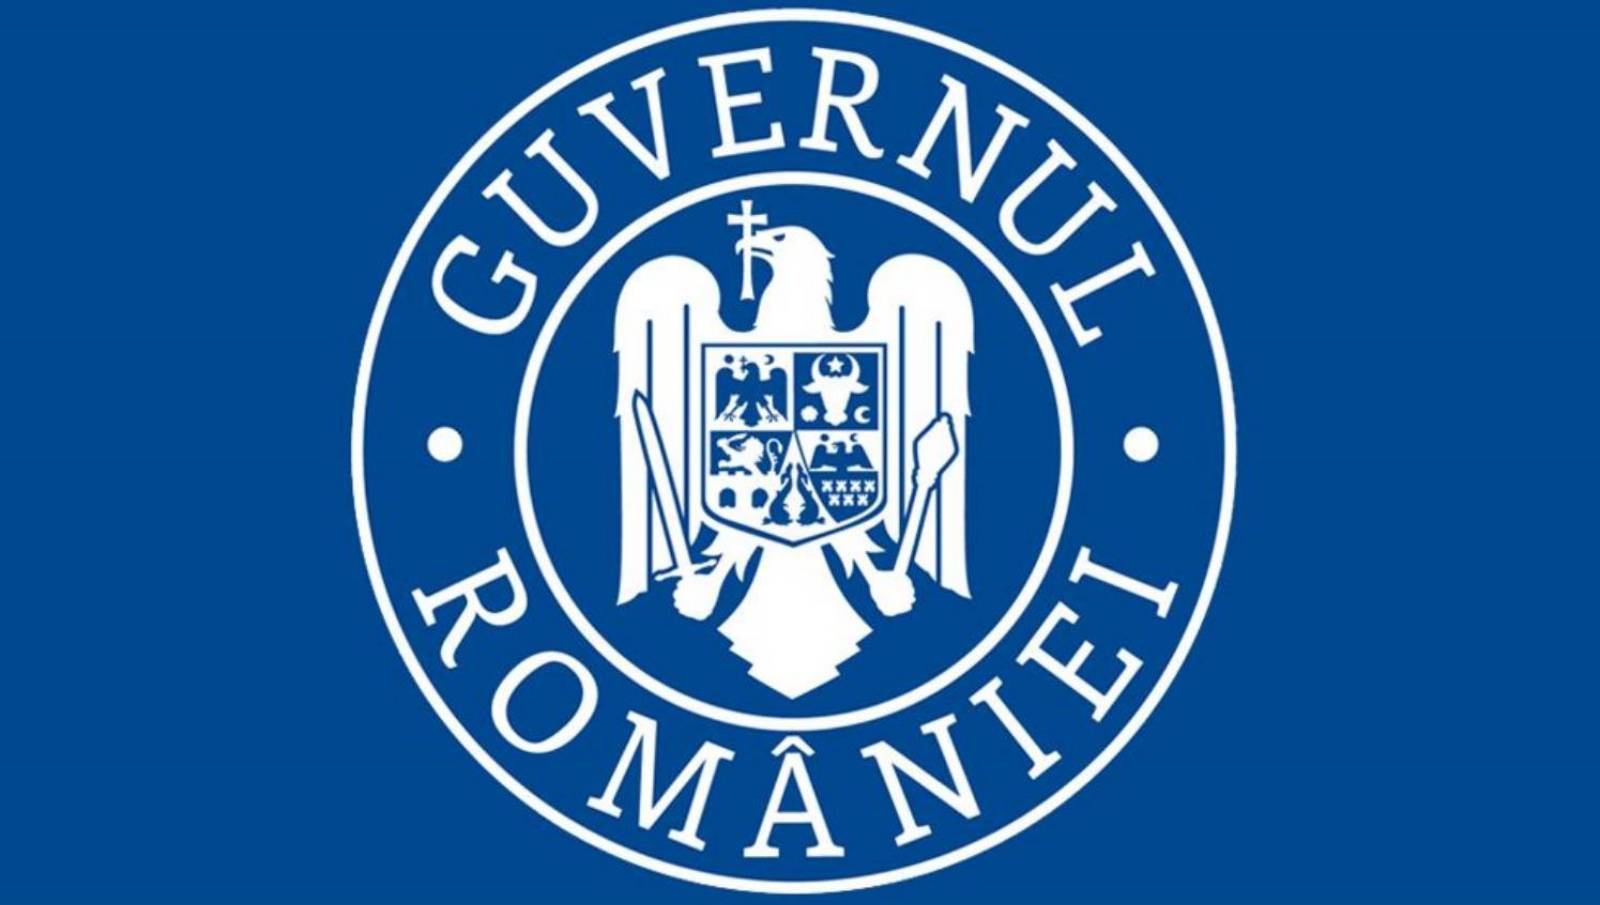 The Romanian government bans events